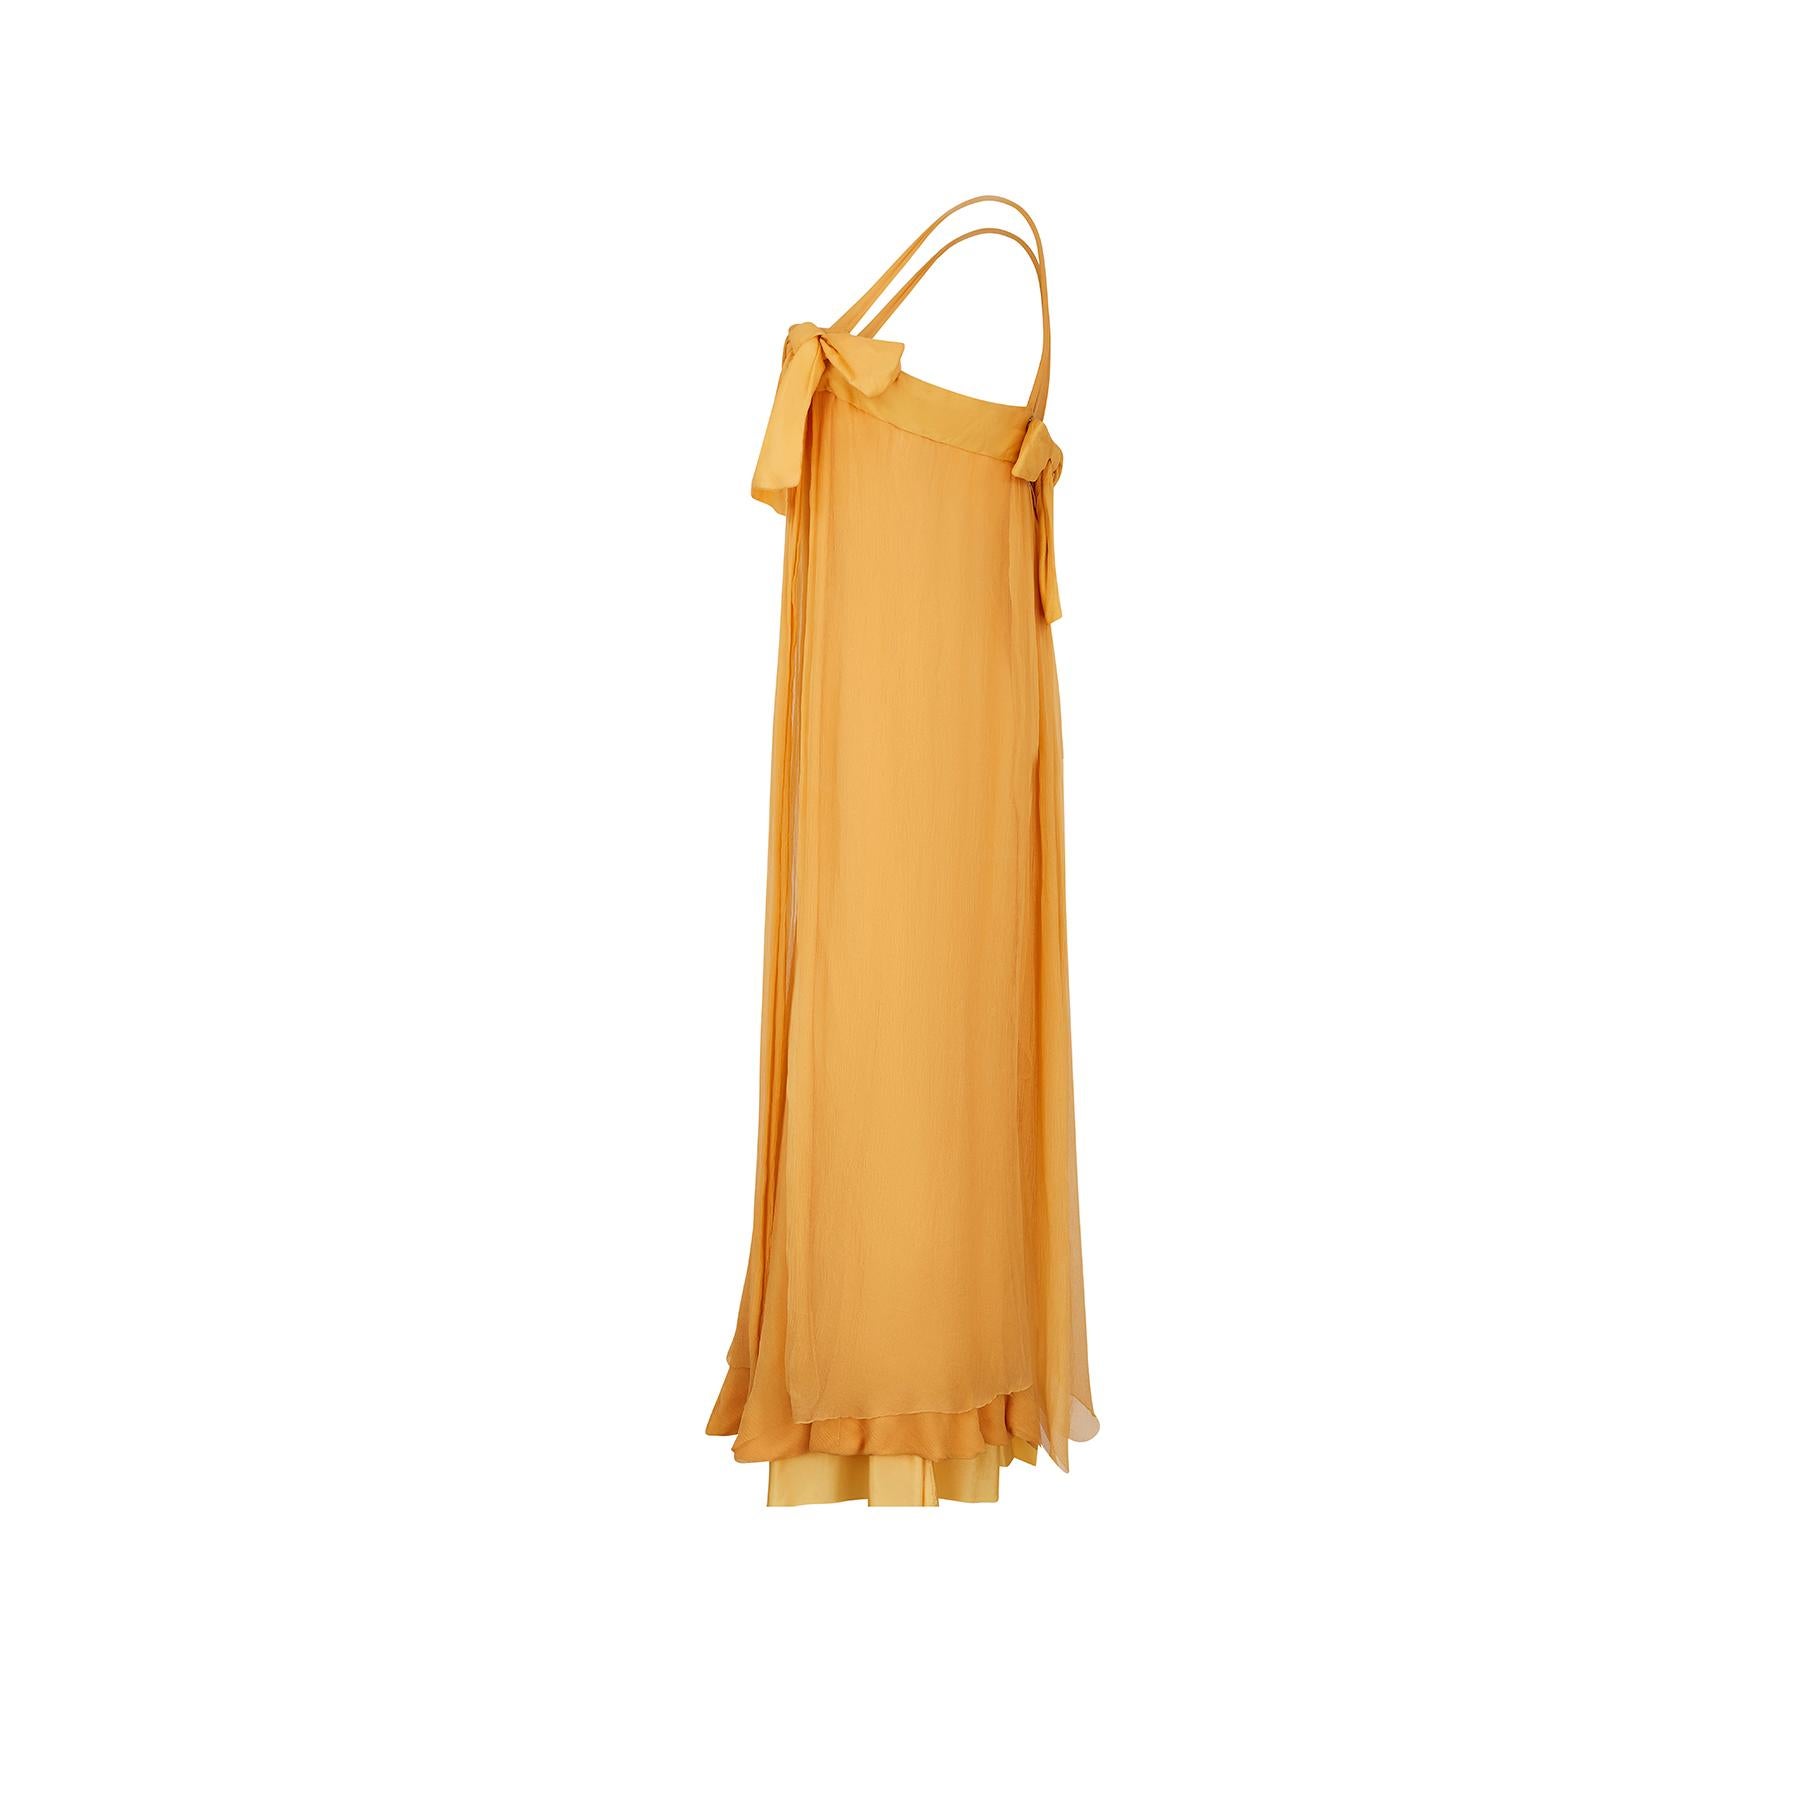 1950s Jacques Heim Haute Couture Yellow Chiffon Dress In Excellent Condition For Sale In London, GB